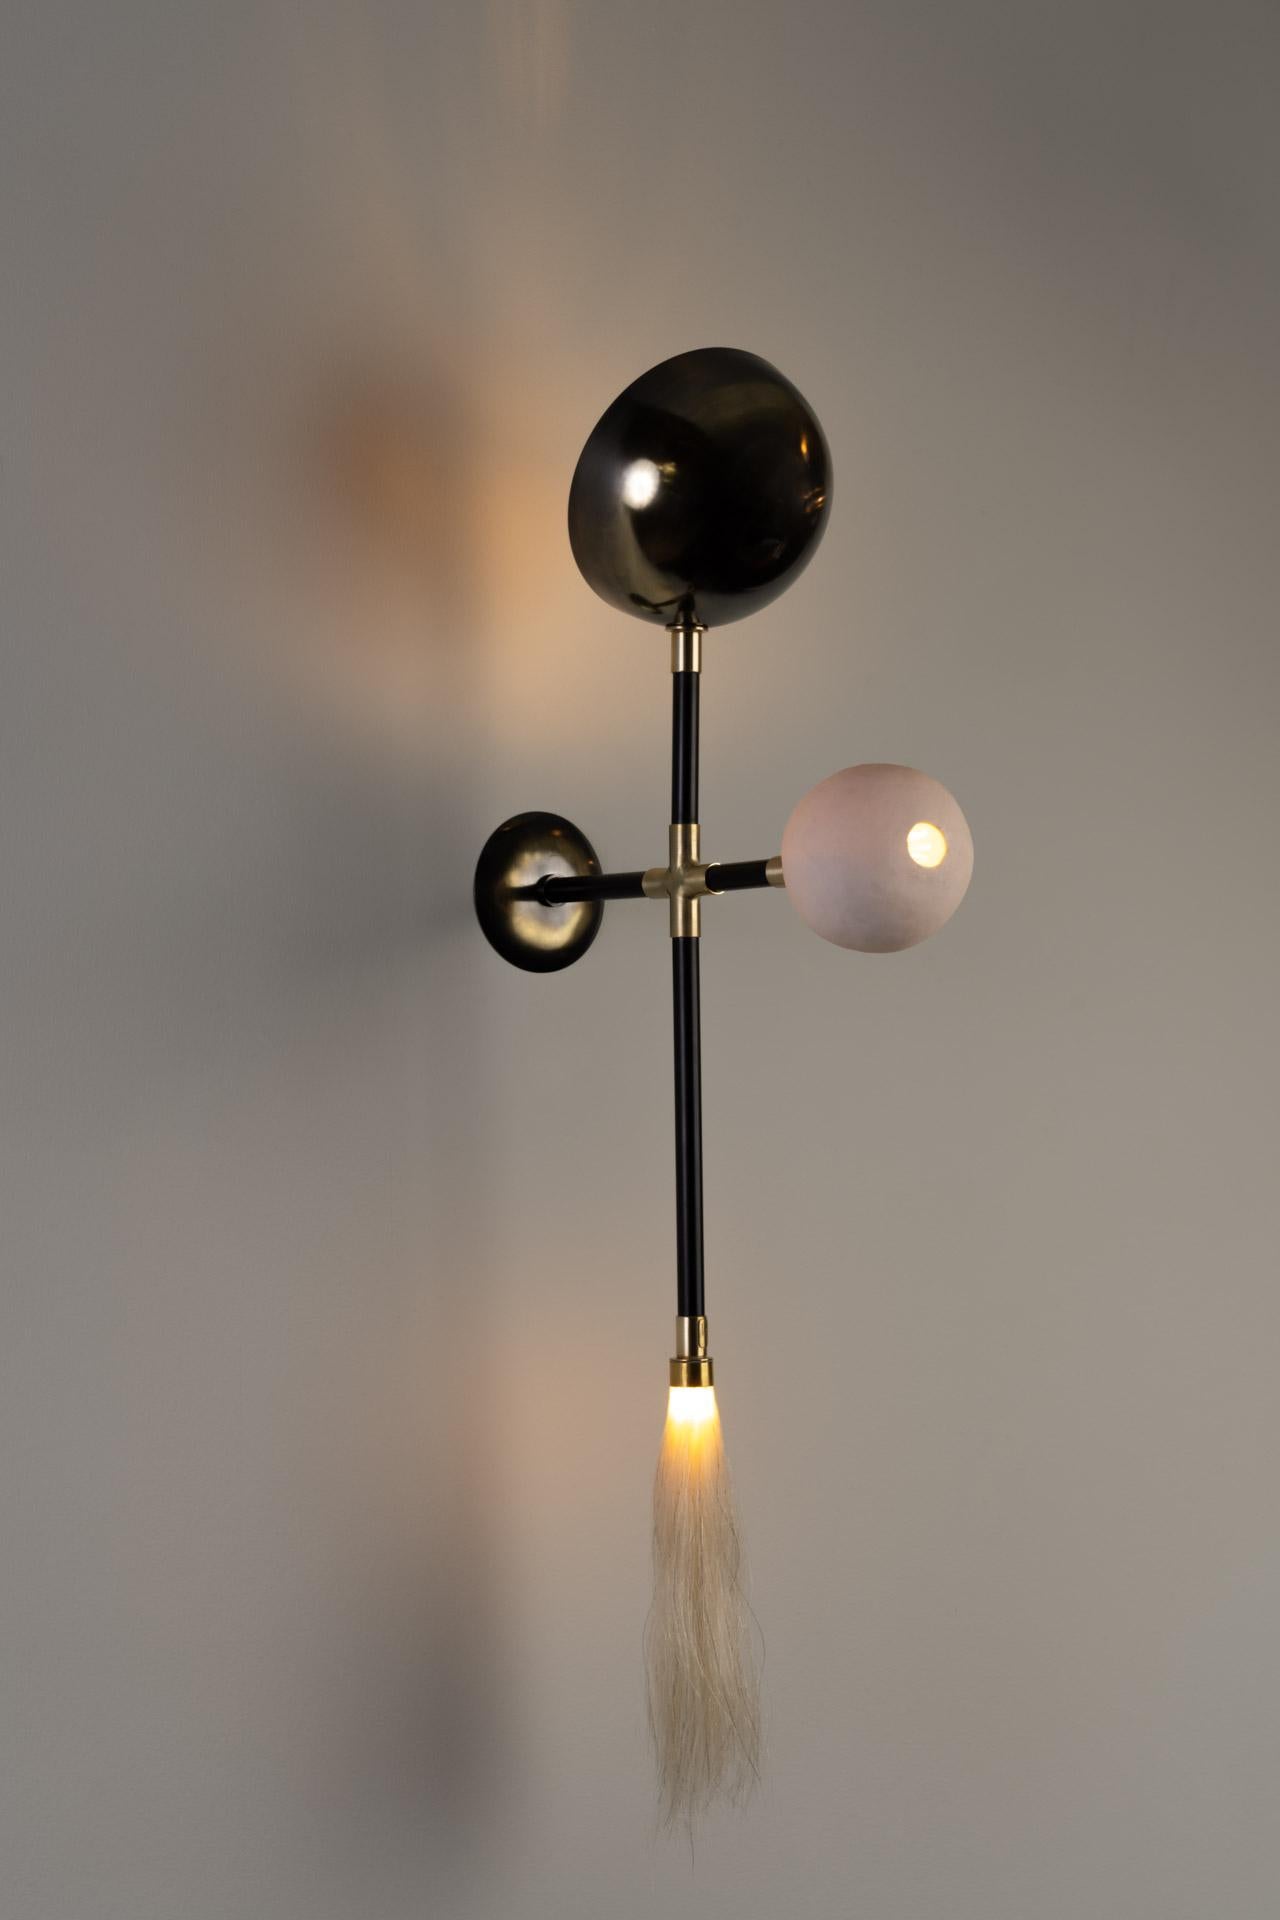 GOGO sconce was designed for the Mol collection by Mexican artist Isabel Moncada.

Go-go, a term used in the ’60s to describe a frantic, pulsating expression of joyful go, go, go… The three significant elements light up in this cross and the